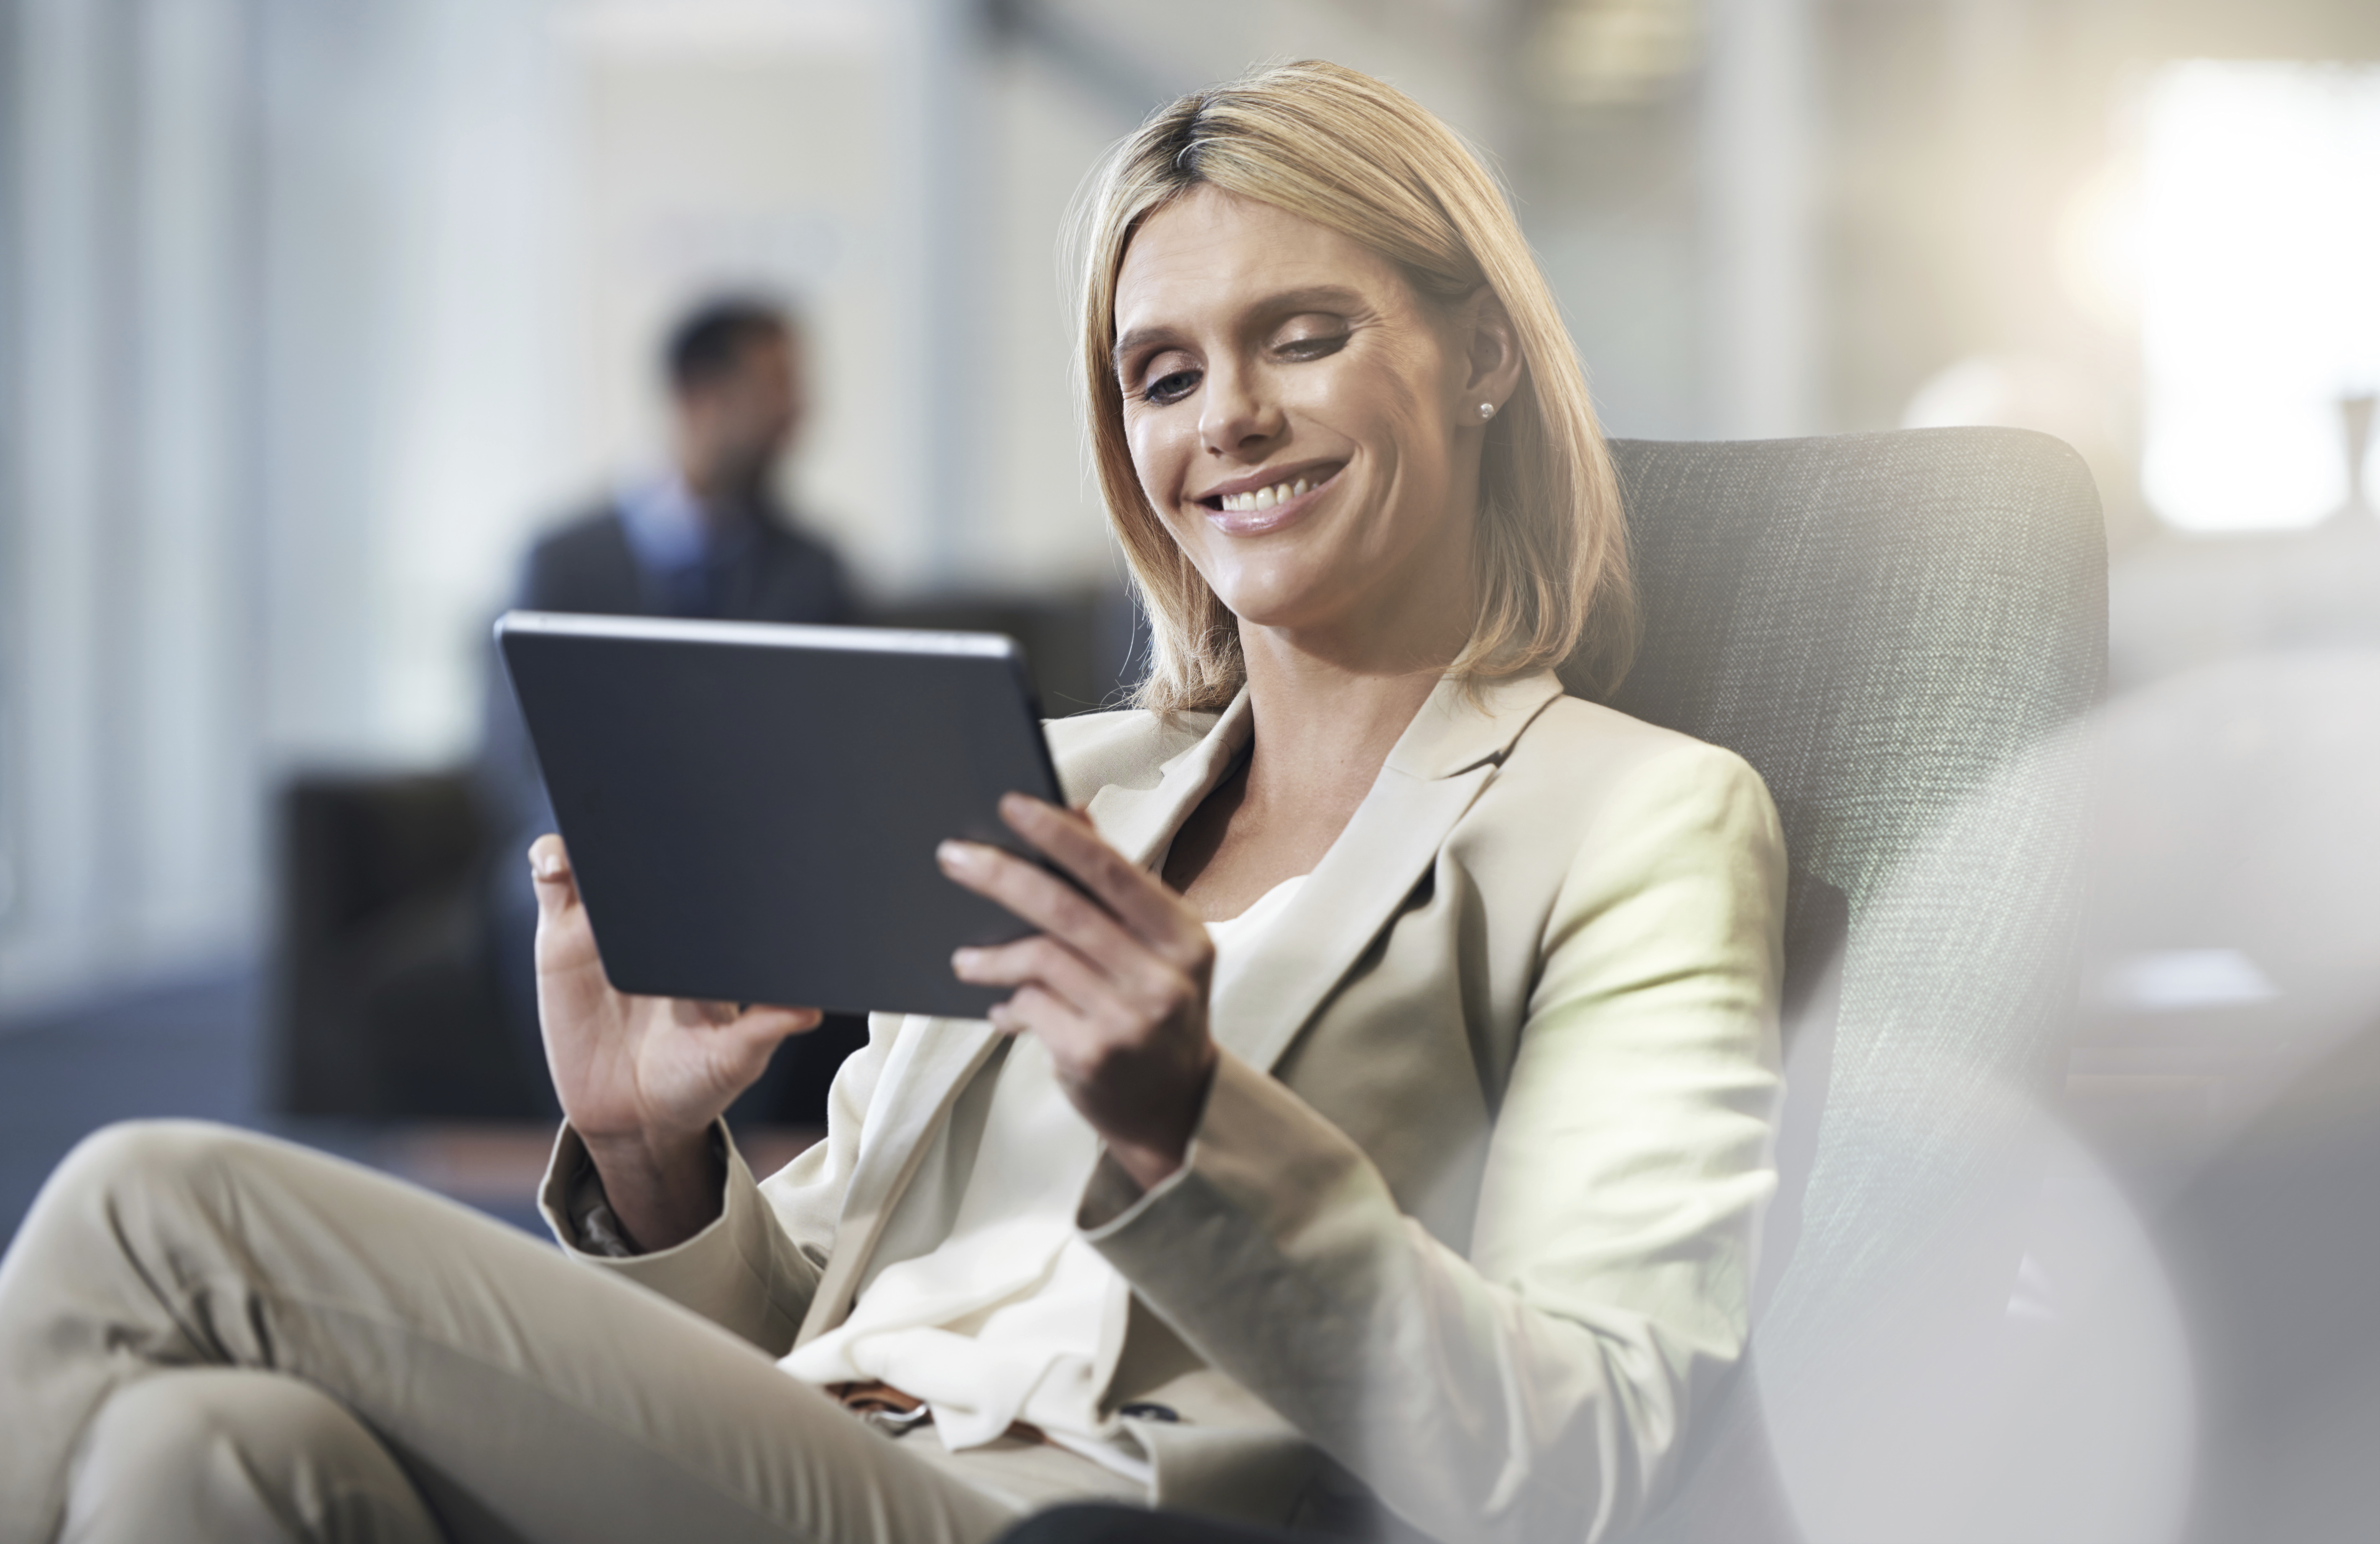 photo of female-presenting person in business attire smiling at tablet